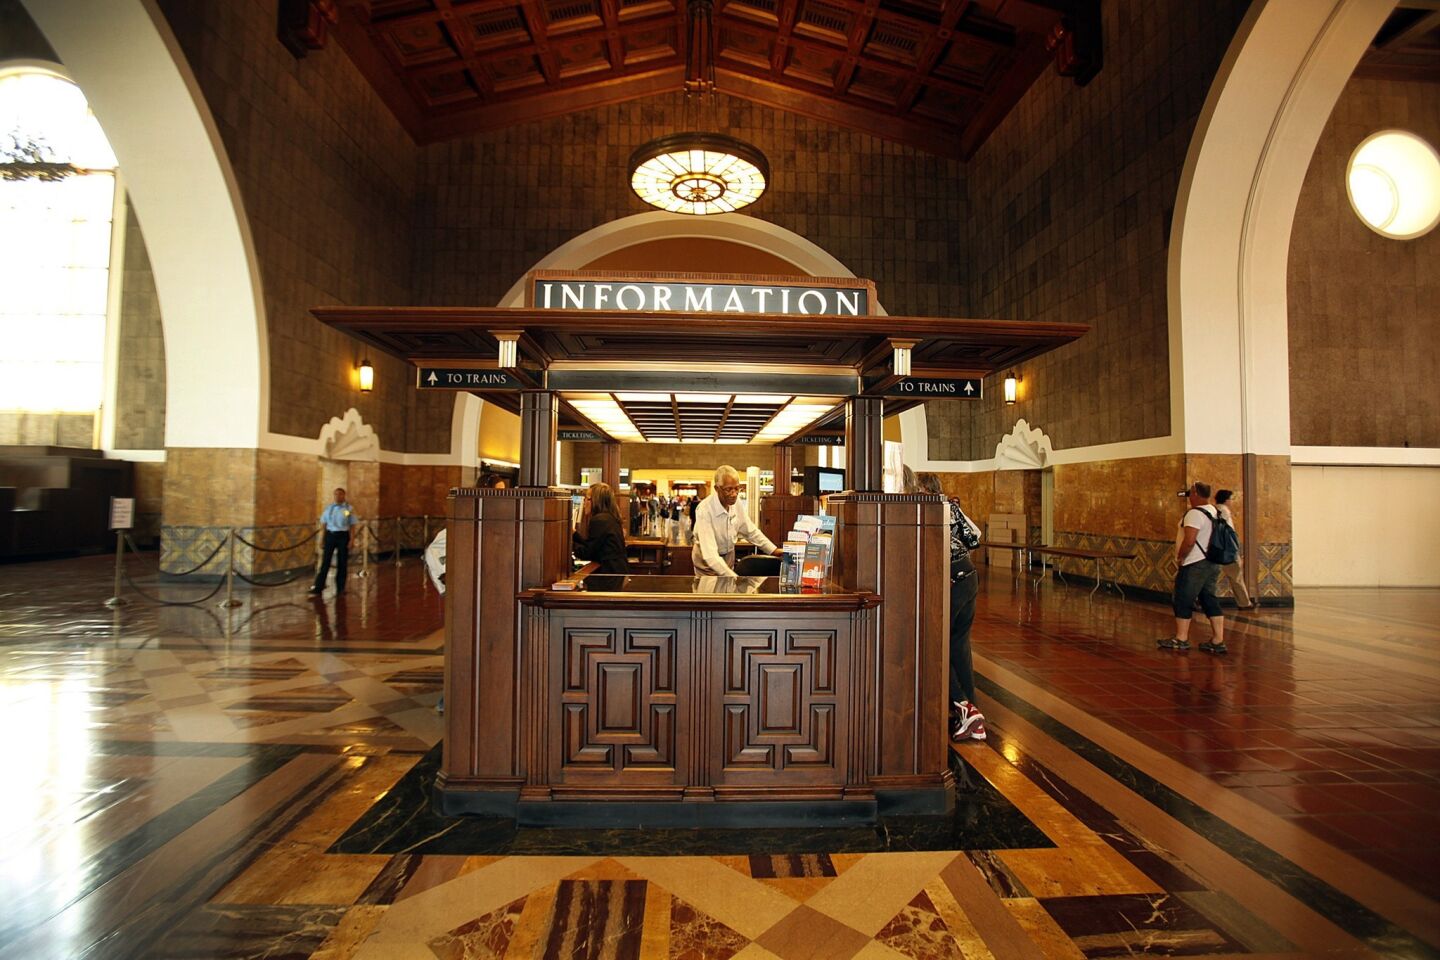 An interior view of the historic information desk at the Los Angeles Union Station.